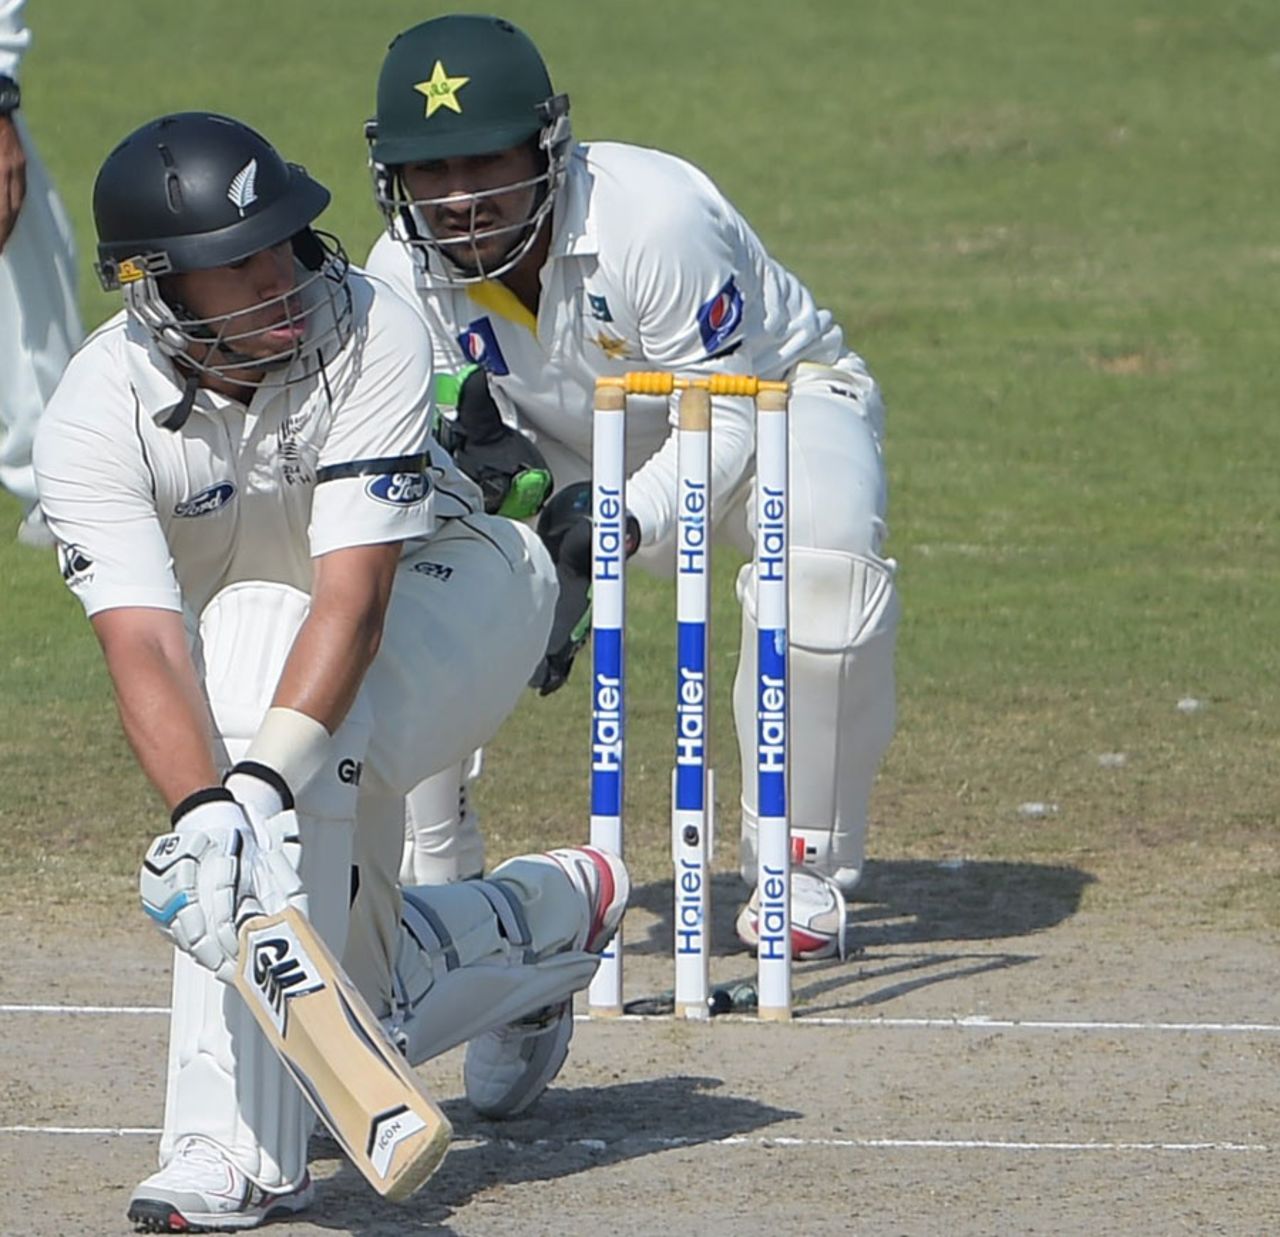 Ross Taylor sweeps during his 50, Pakistan v New Zealand, 3rd Test, Sharjah, 3rd day, November 29, 2014